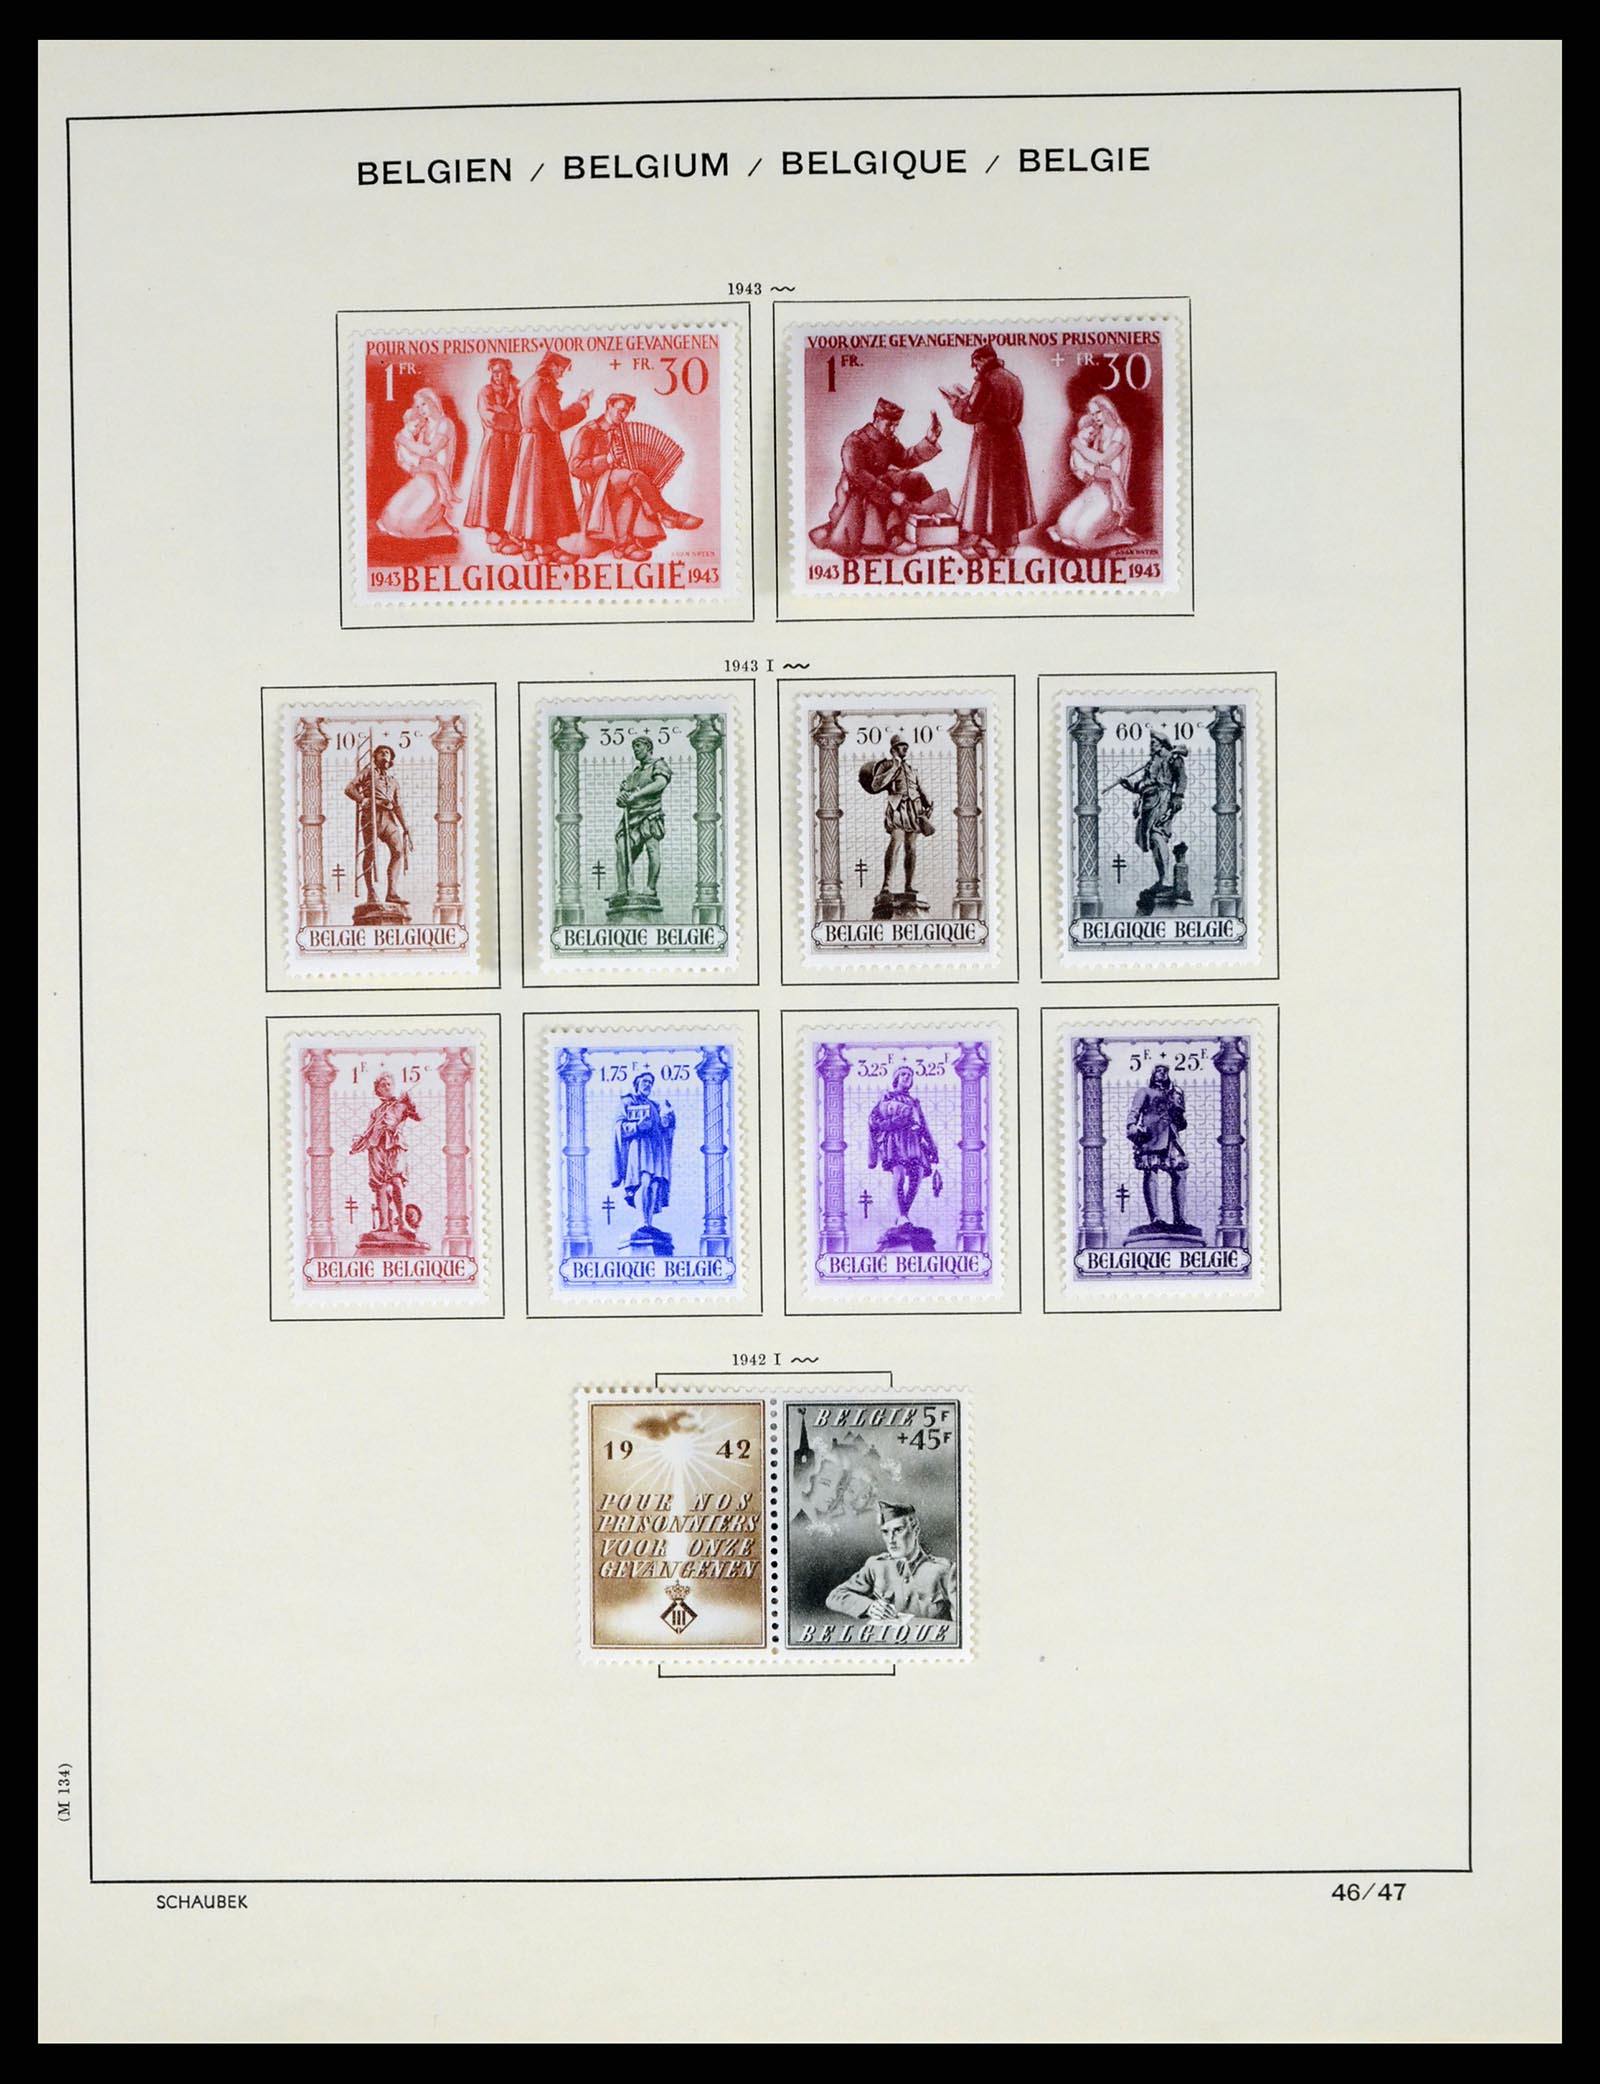 37595 055 - Stamp collection 37595 Super collection Belgium 1849-2015!